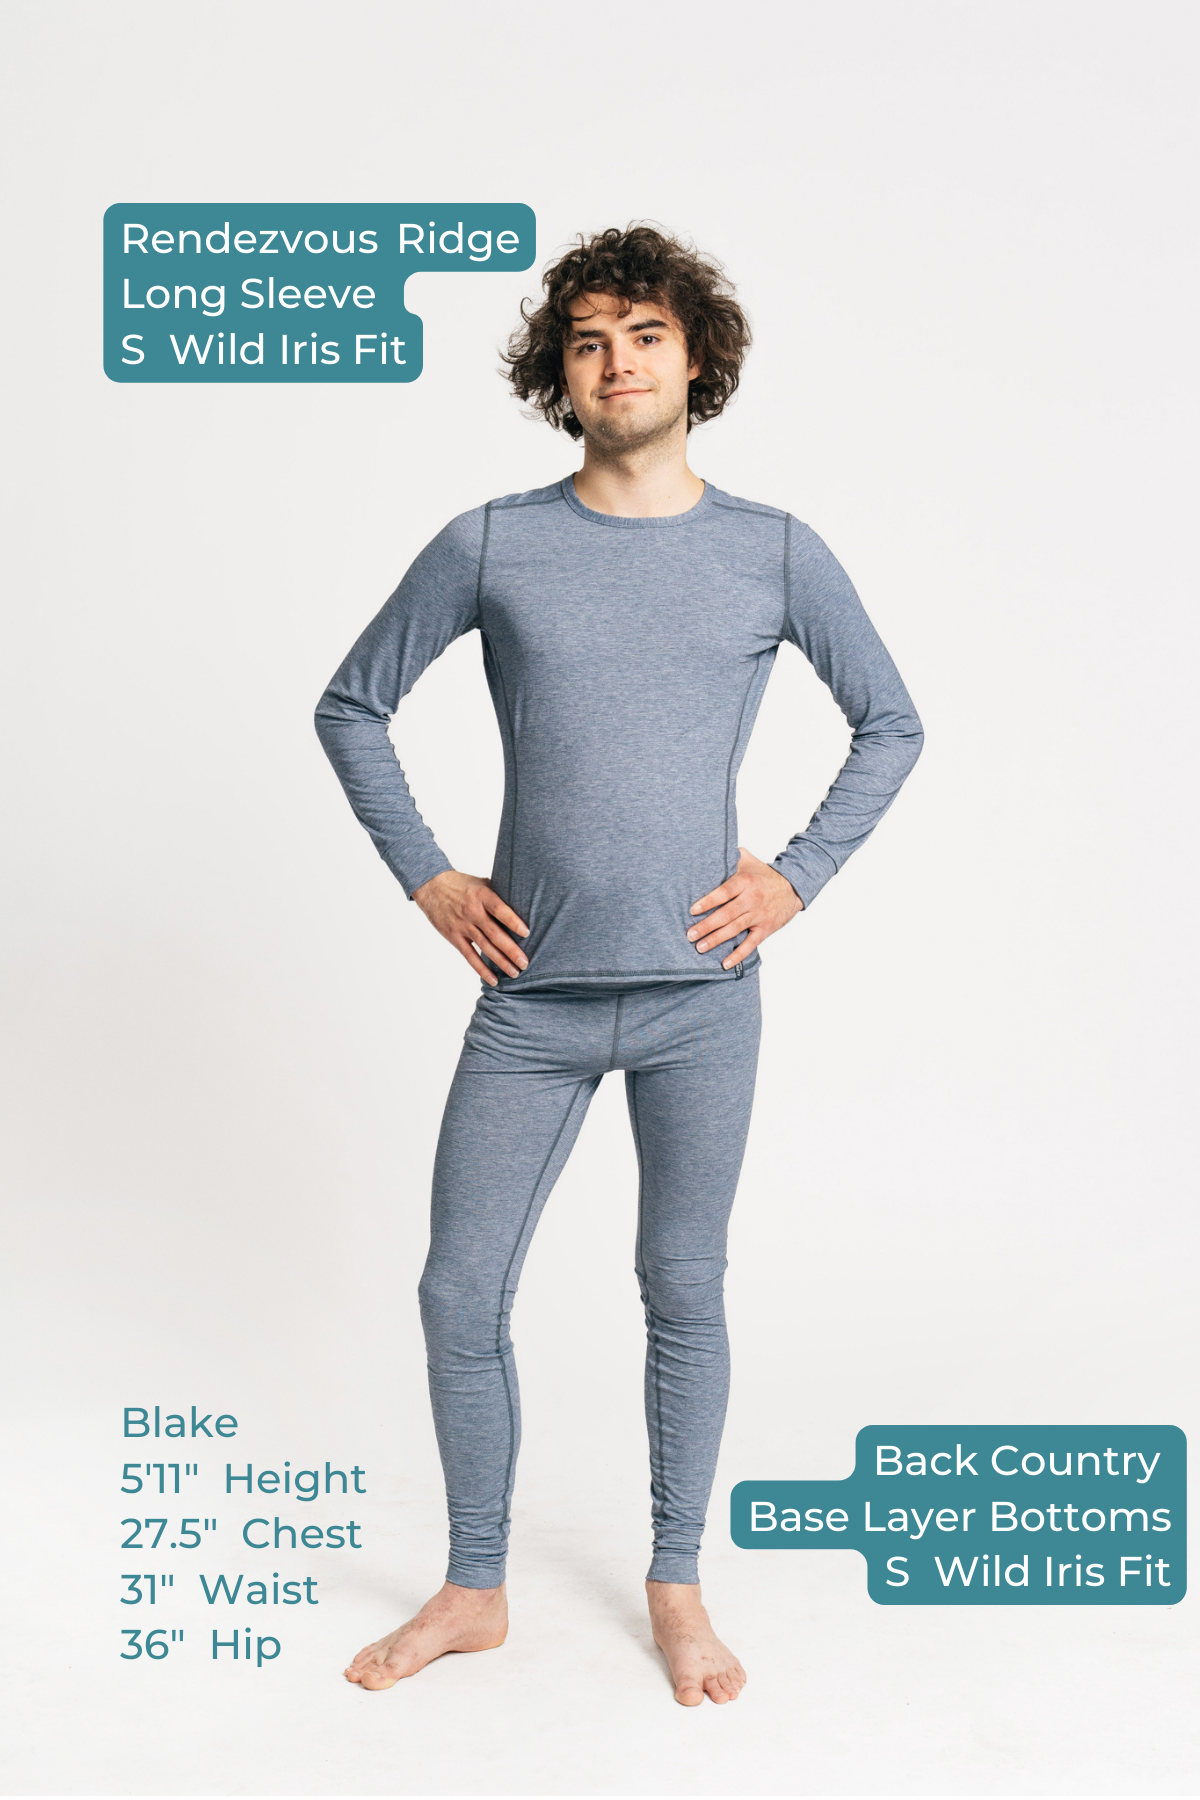 alpine fit long sleeve base layer size small male model